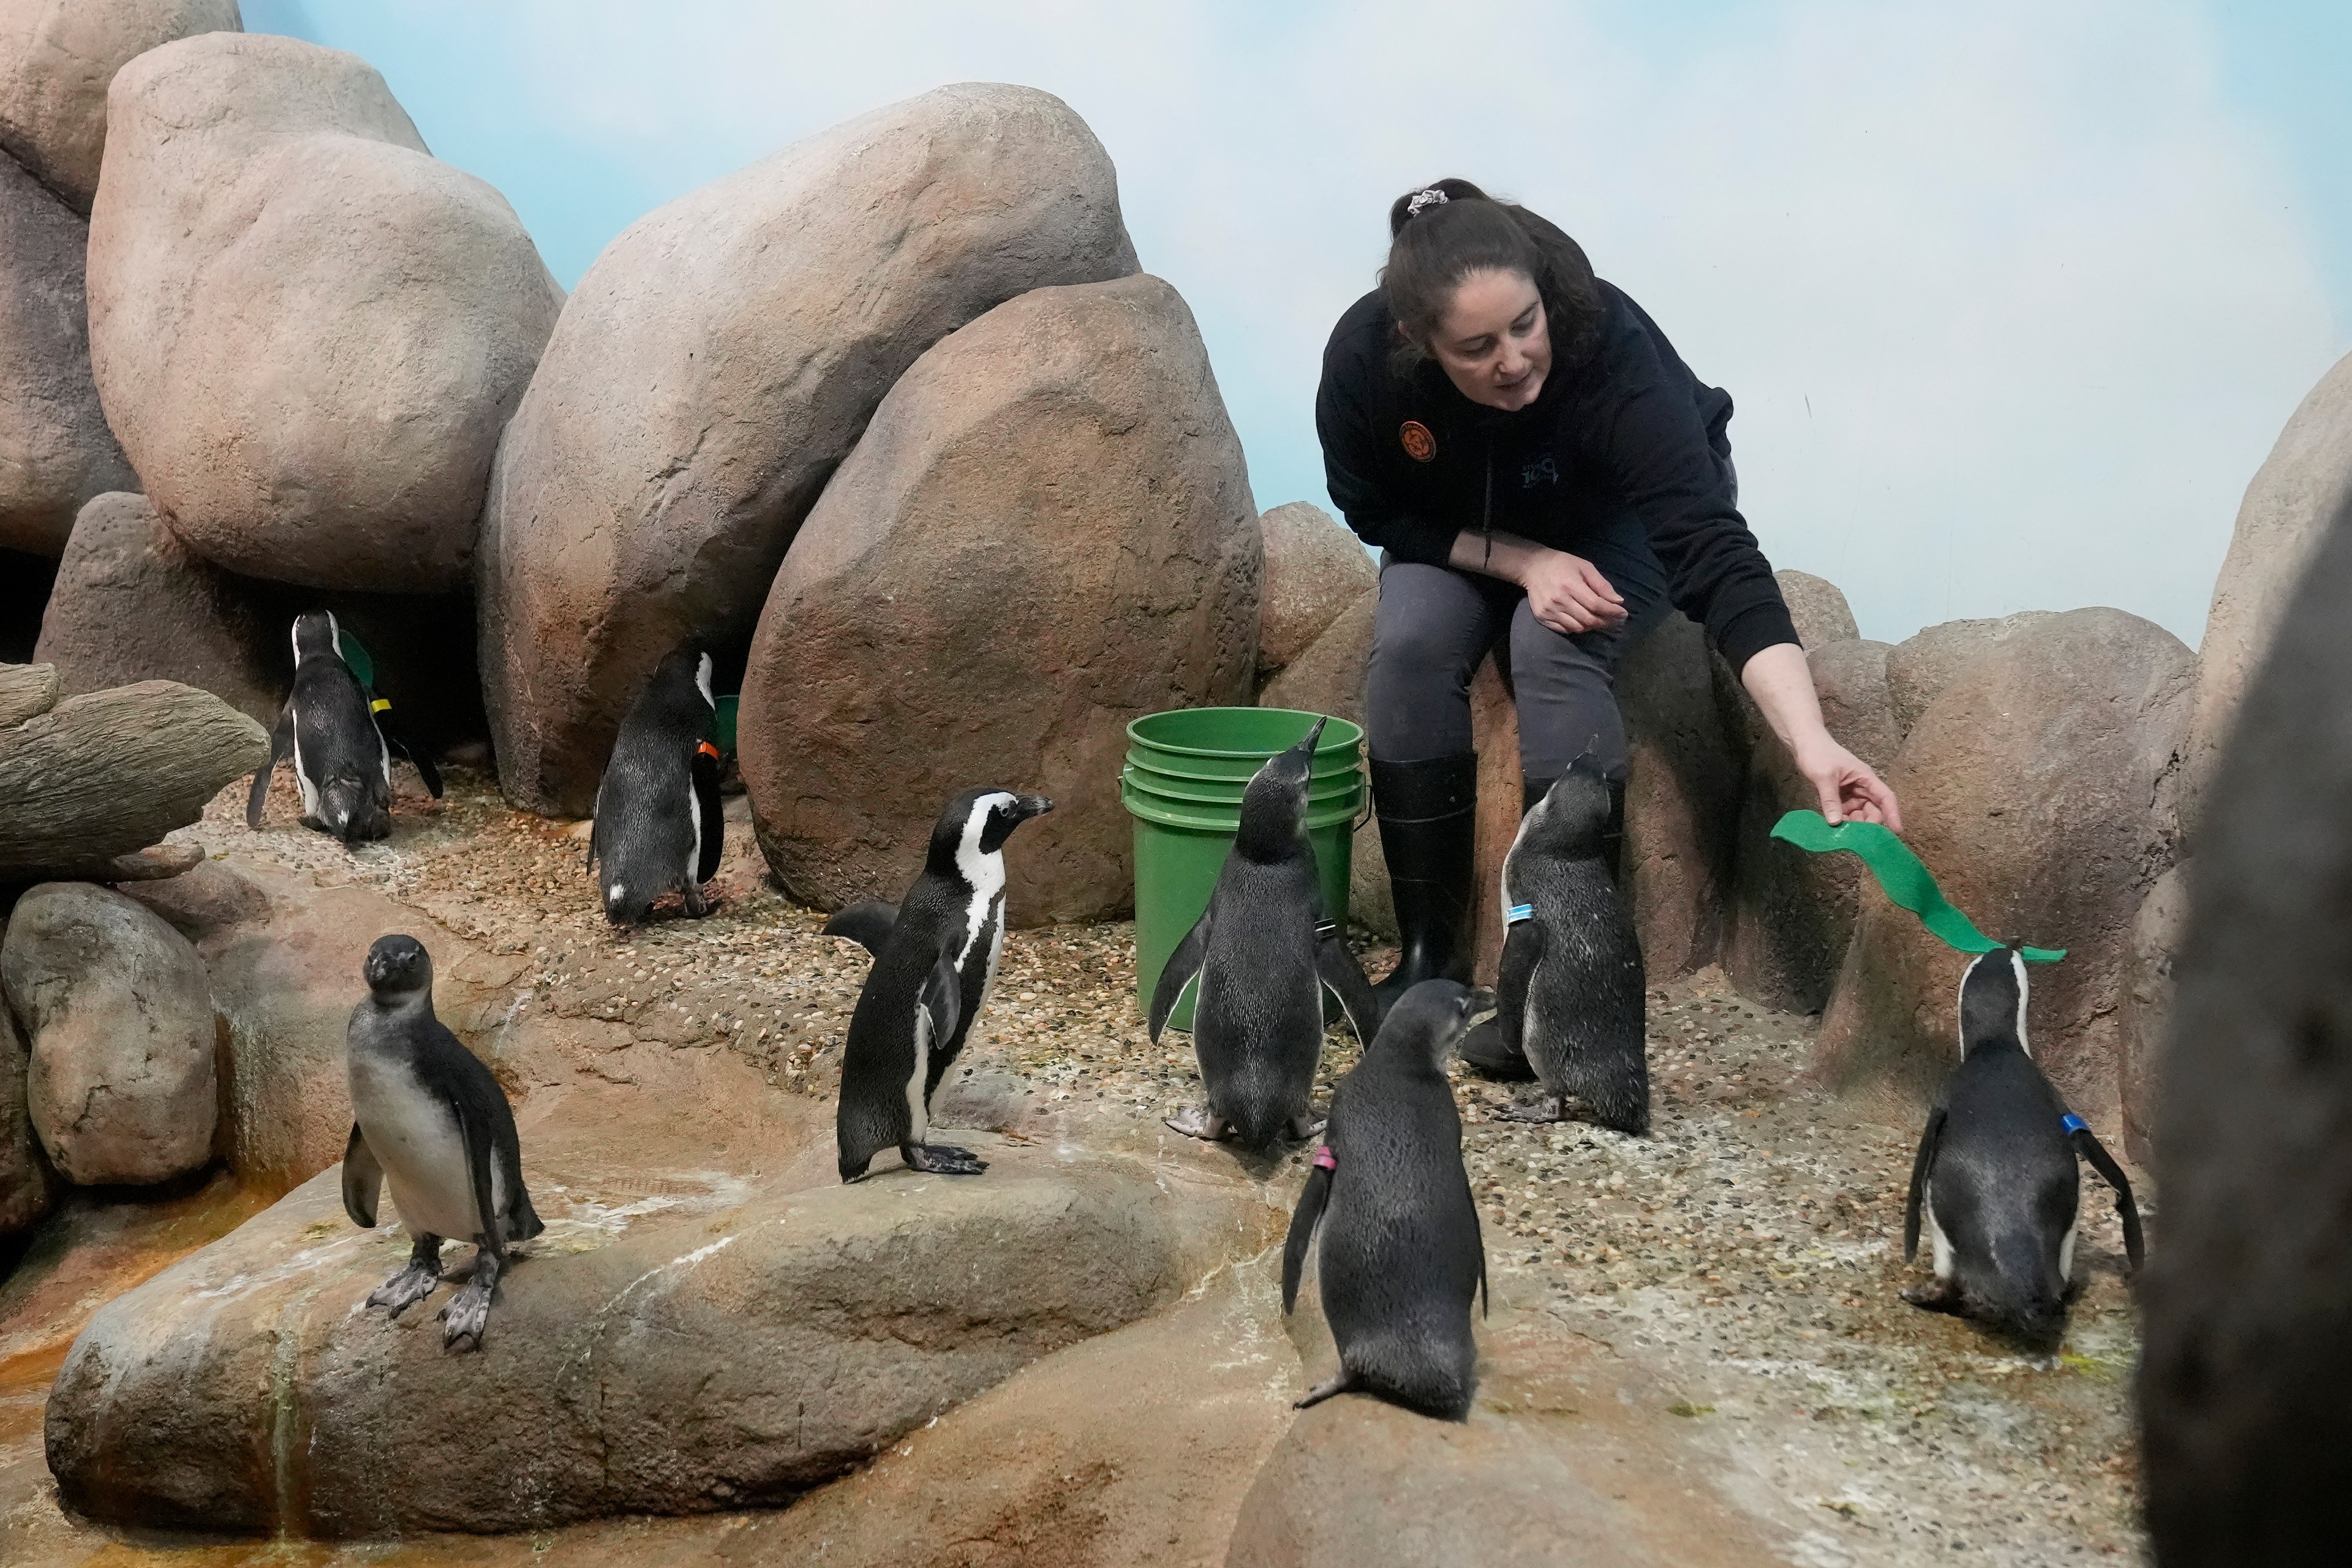 A woman sitting on rocks feeds a gaggle of baby penguins